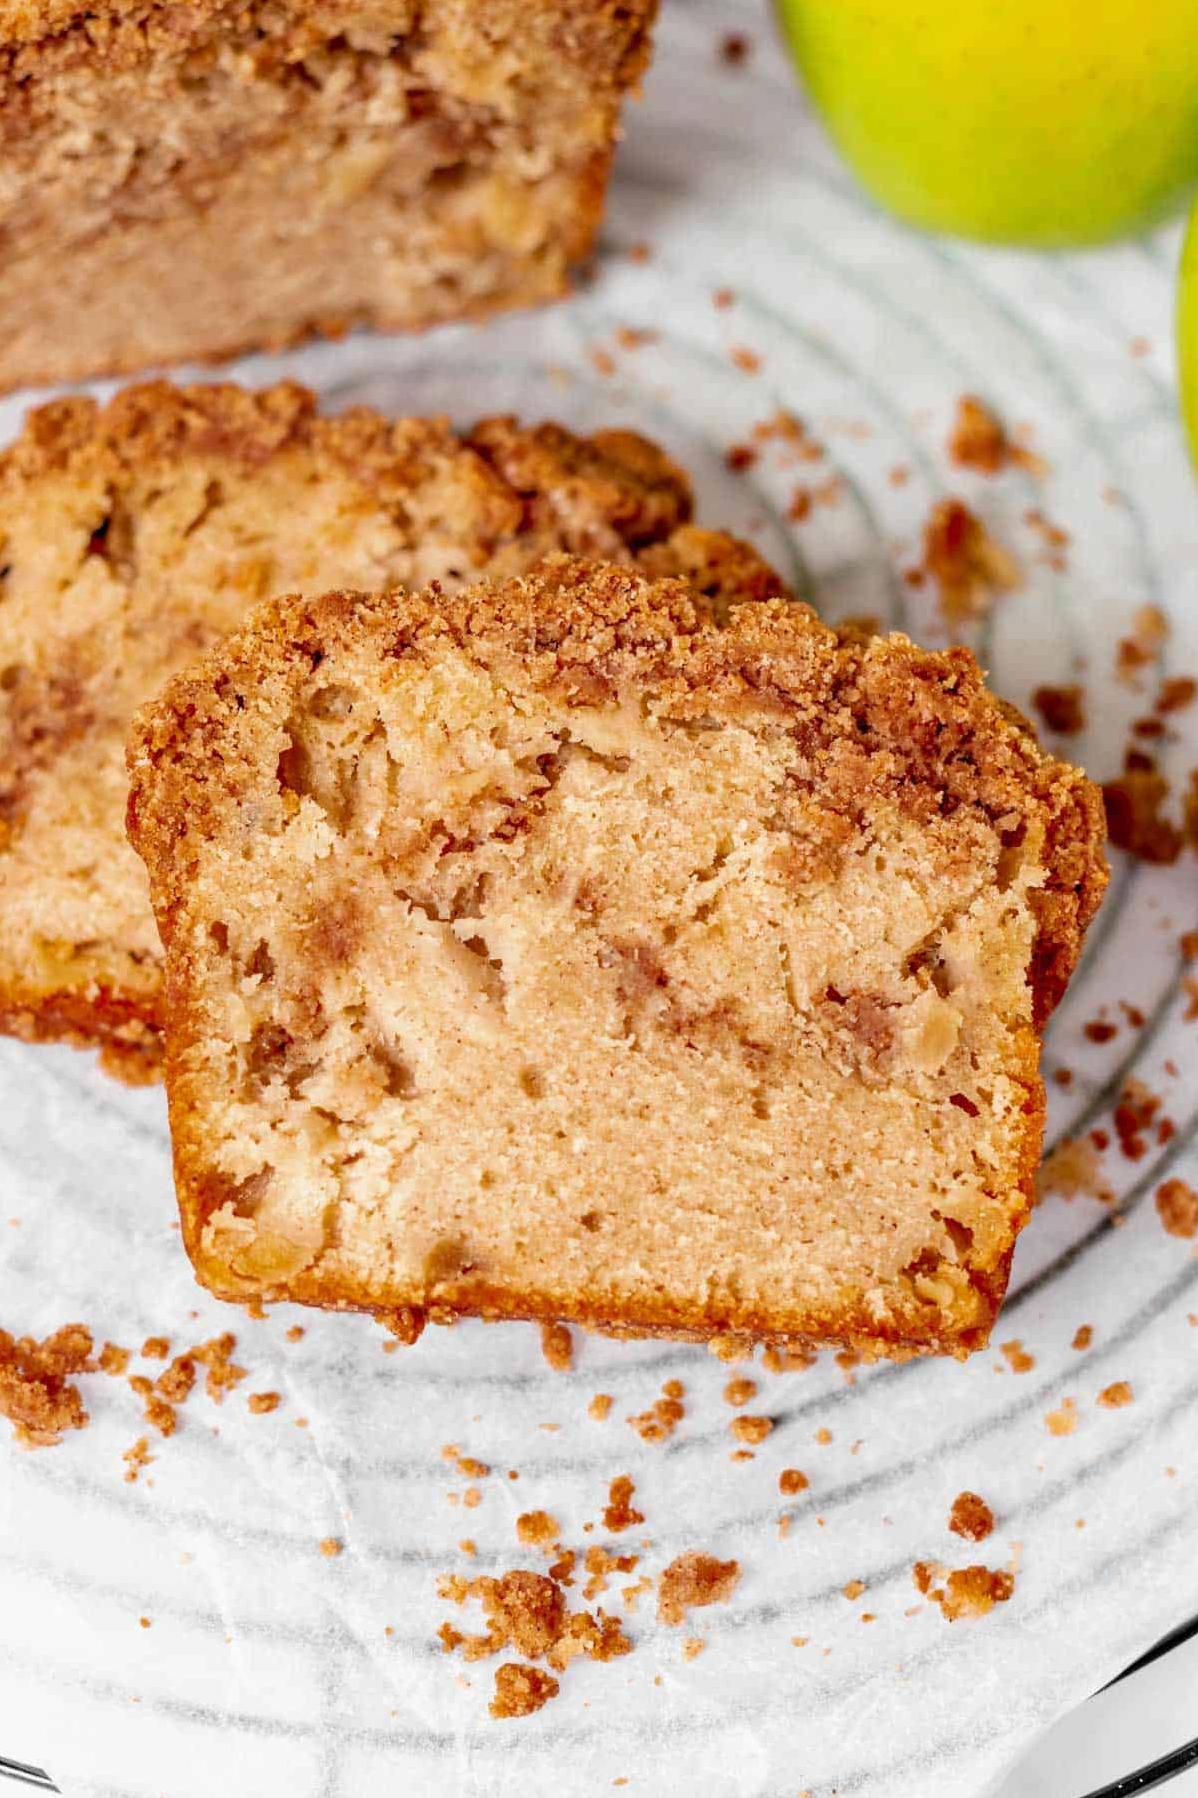  Savor every bite of the soft and moist bread with crunchy apple bits.